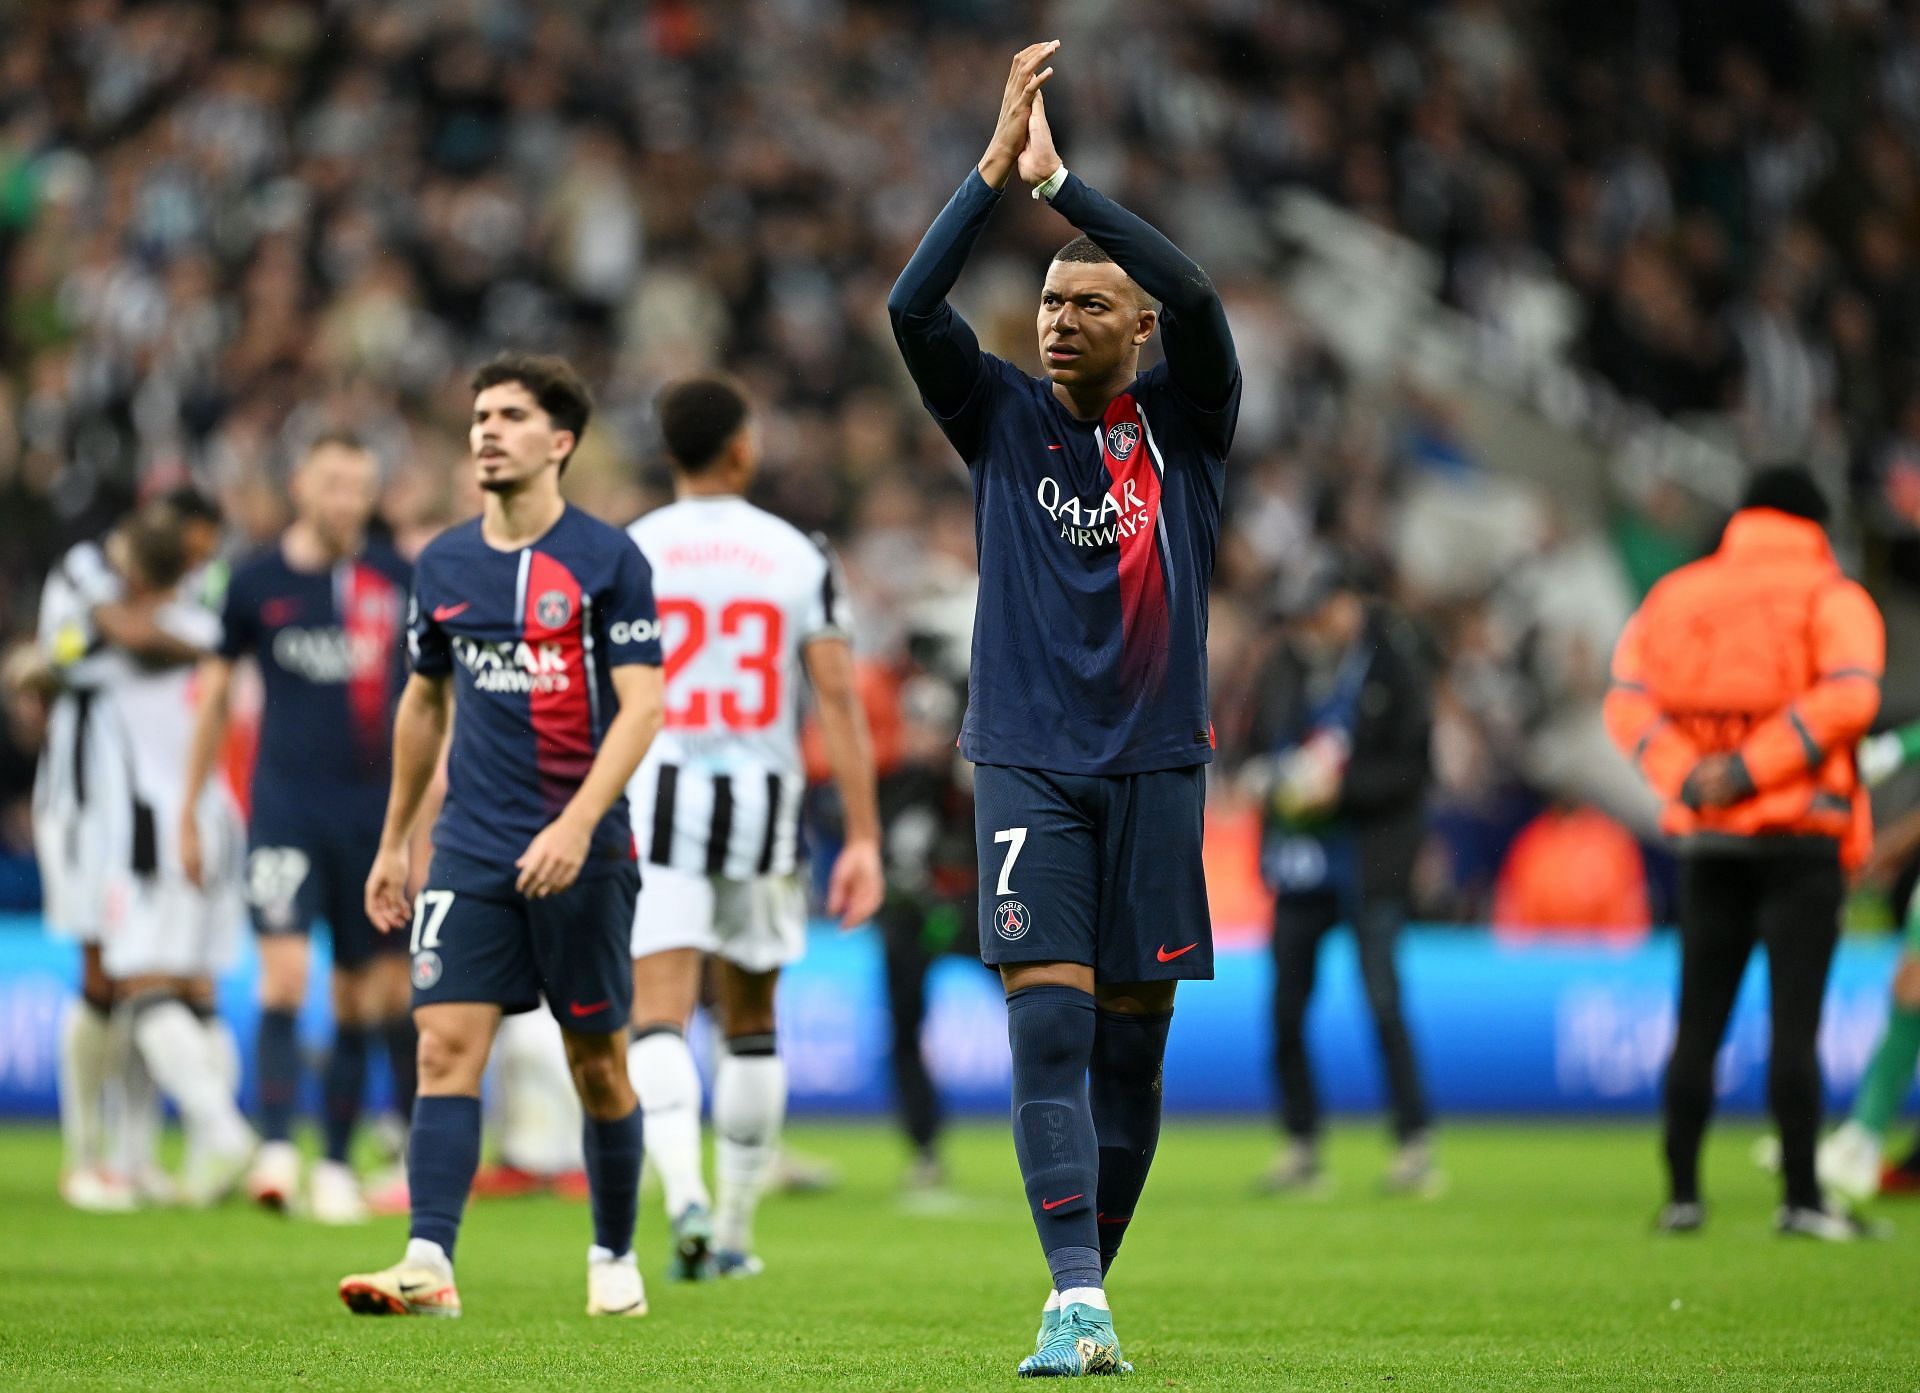 Kylian Mbappe was a shell of his usual self against Newcastle.